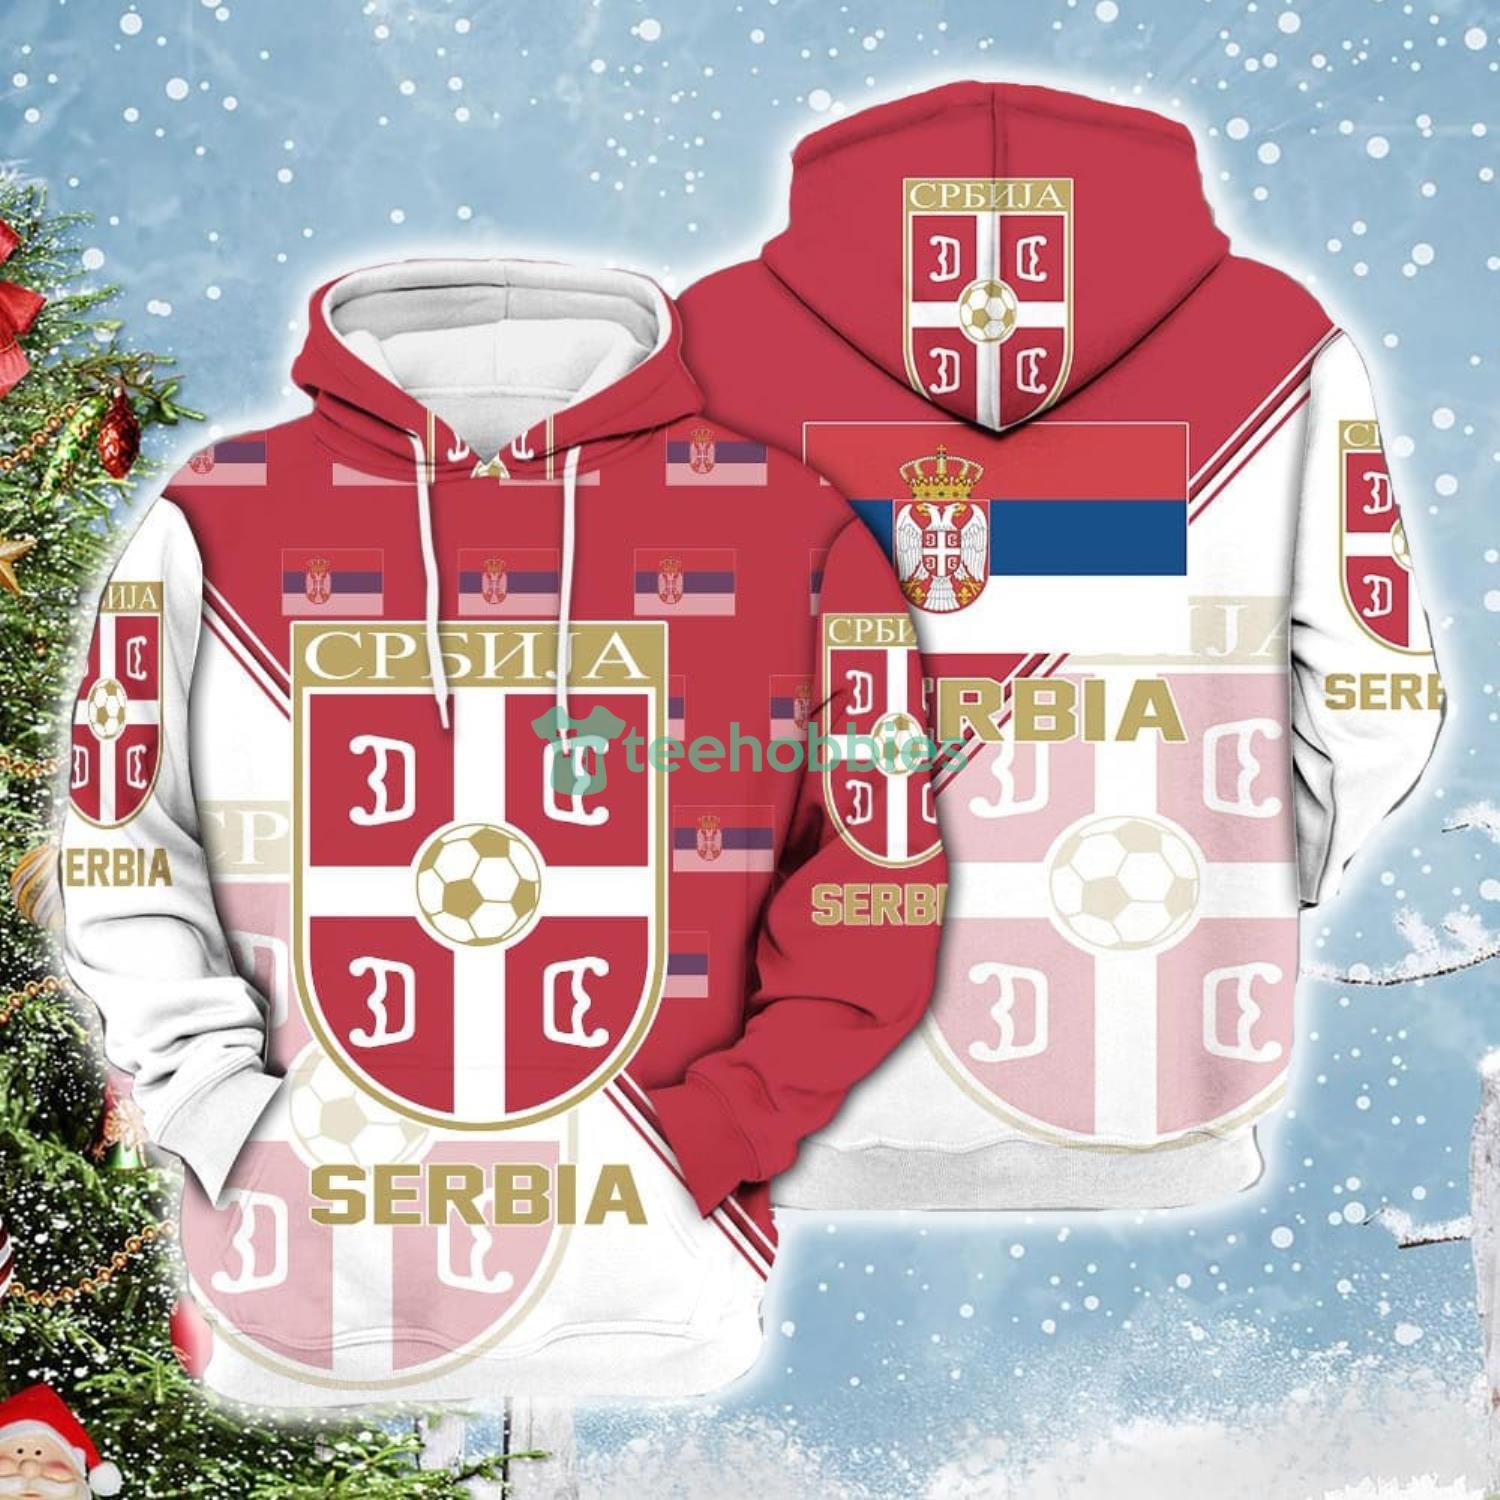 Serbia National Soccer Team Qatar World Cup 2022 Champions Soccer Team 3D All Over Printed Shirt Product Photo 5